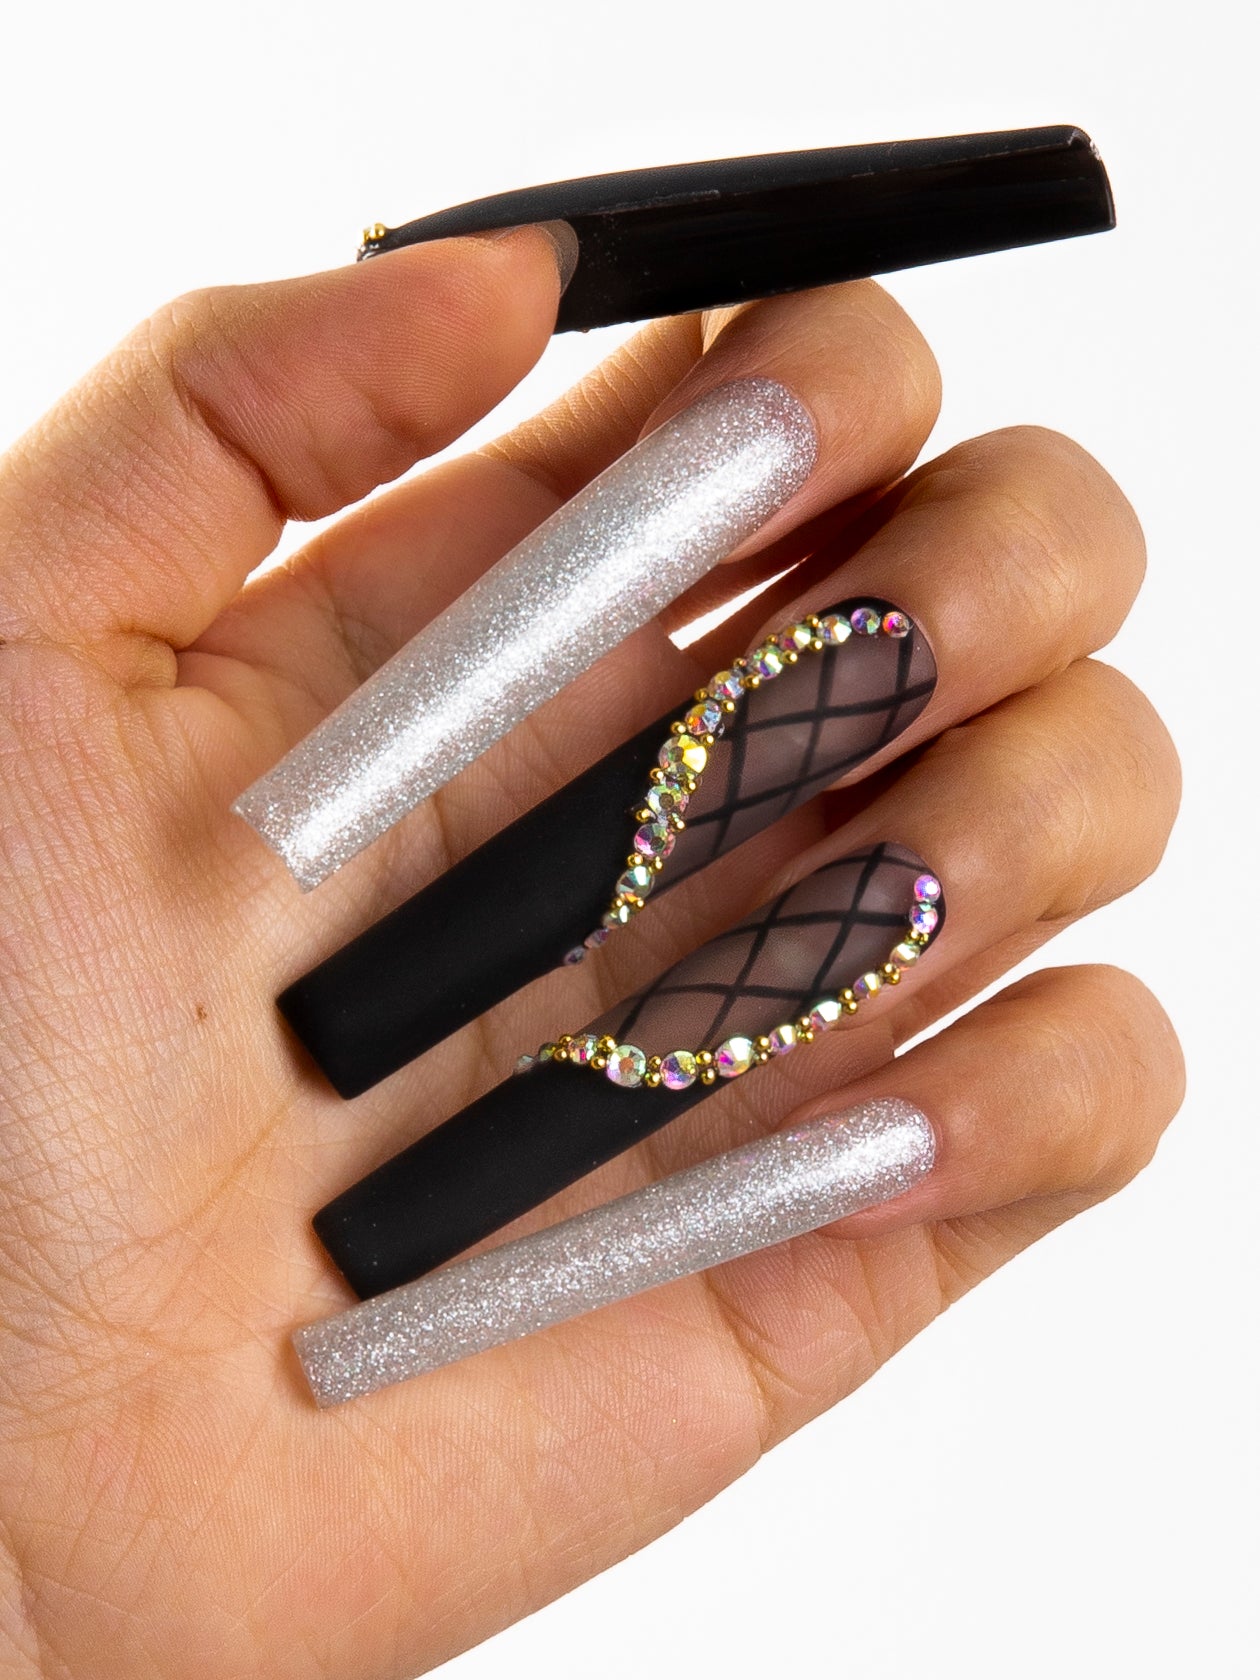 Black Lace press-on nails with silver shimmer and lace decor, featuring rhinestone accents for a sophisticated and elegant look.